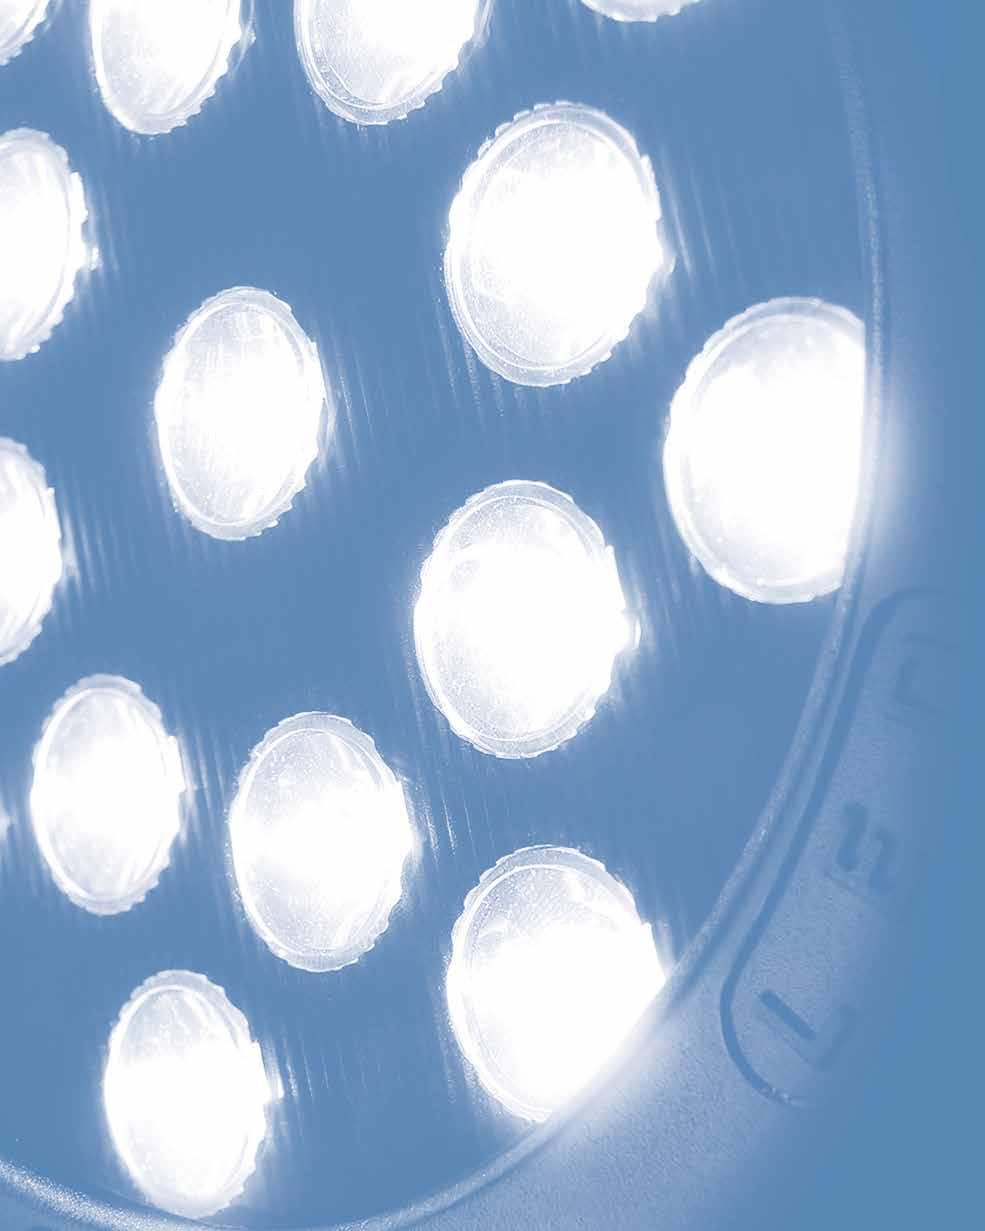 25 Understanding the Changing World of LED SMD (Surface Mounted Device) The SMD chips, or Surface Mounted Device chips, have become very popular due to their versatility.